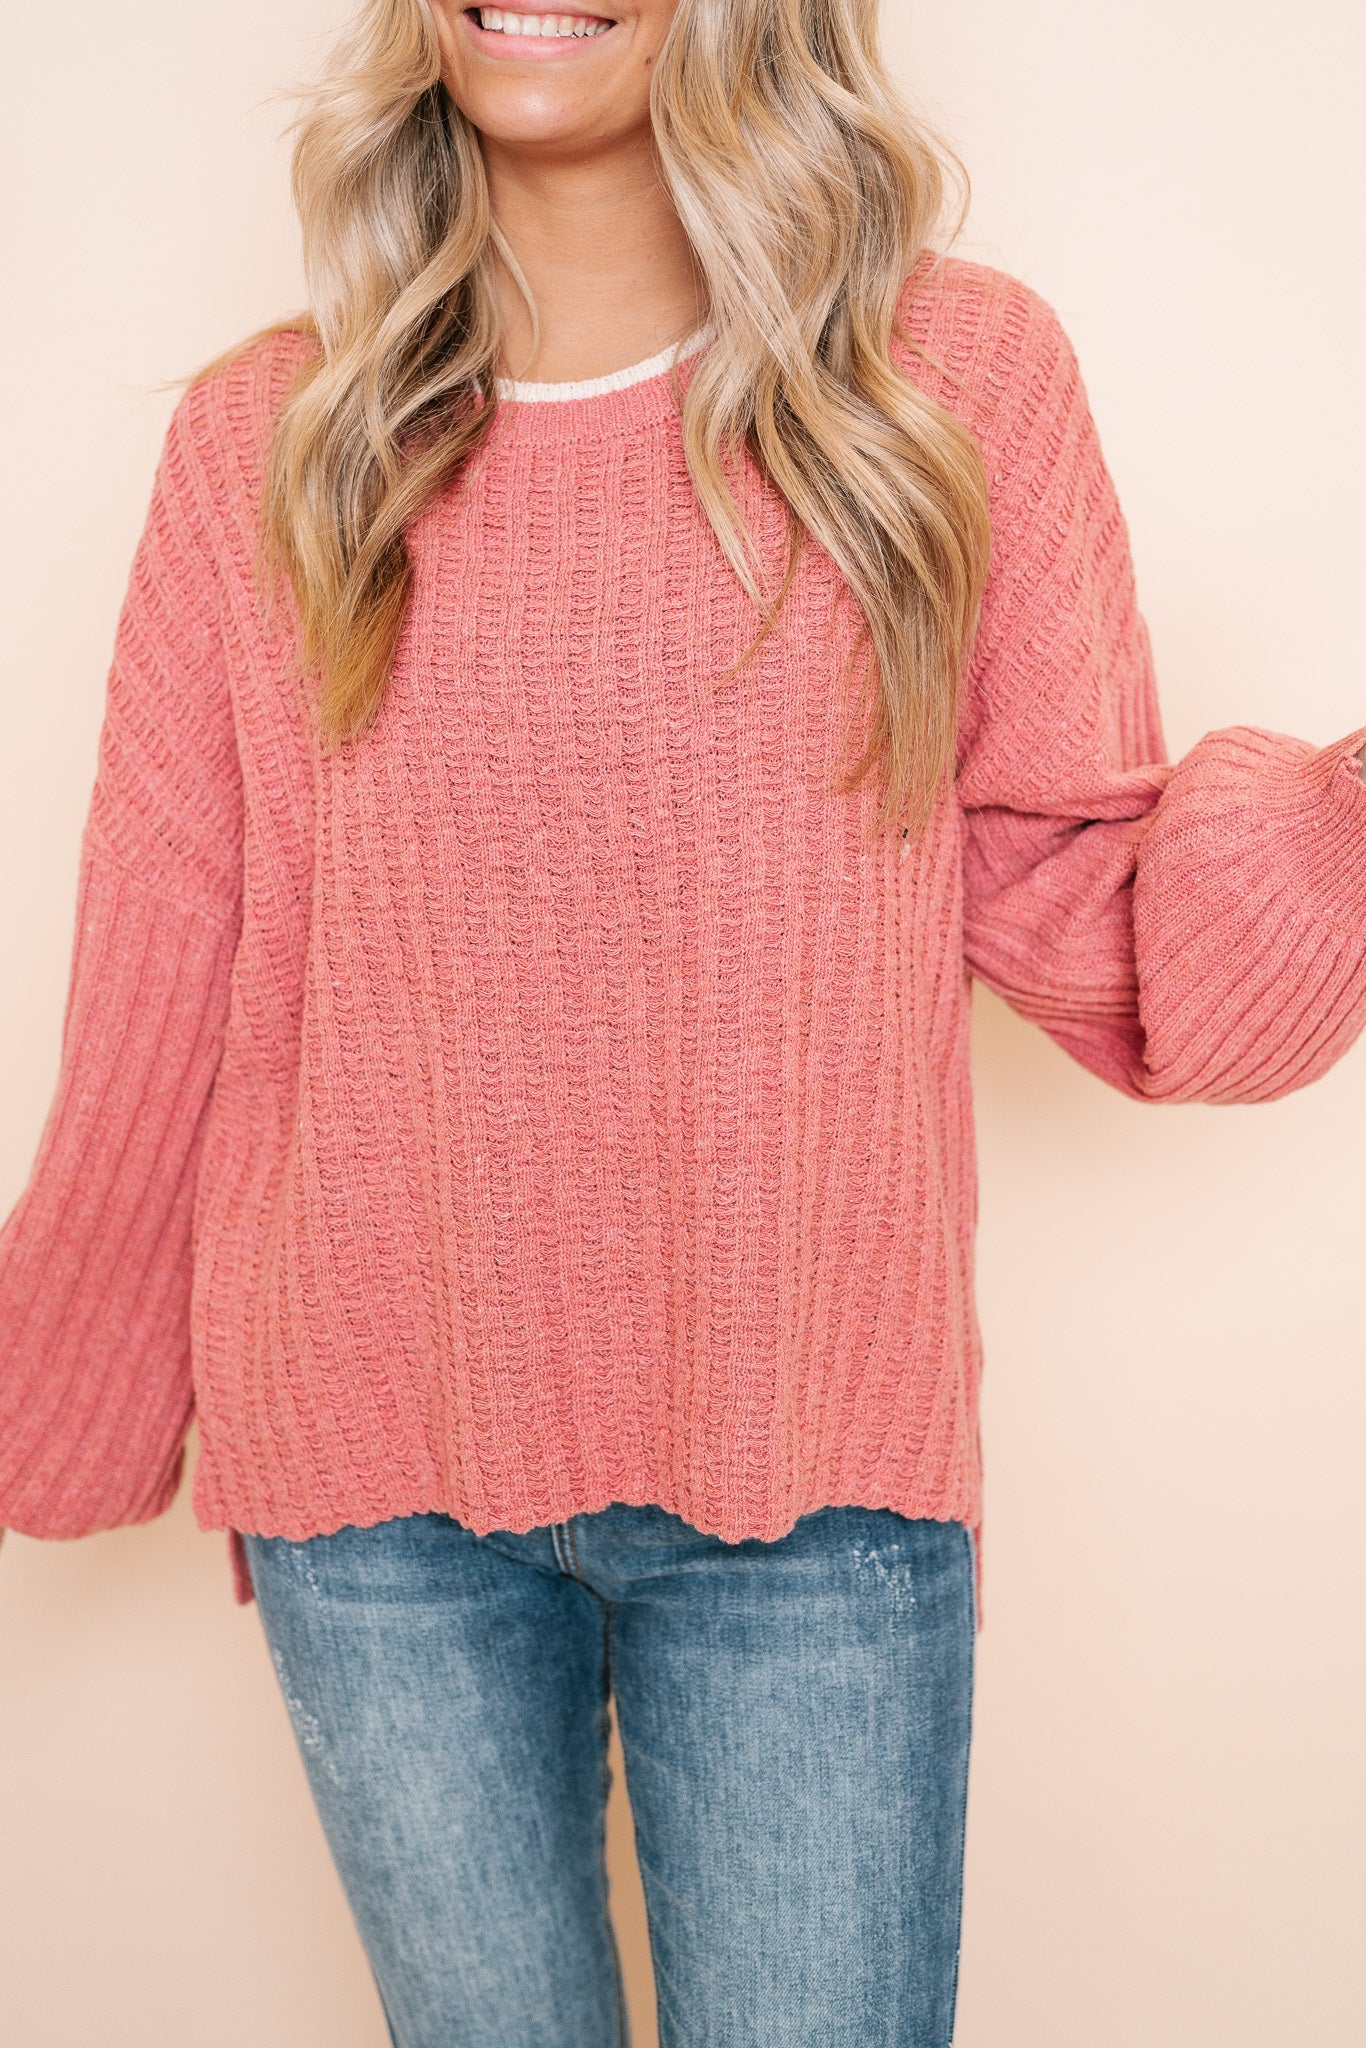 Shop Now Textured Sweater